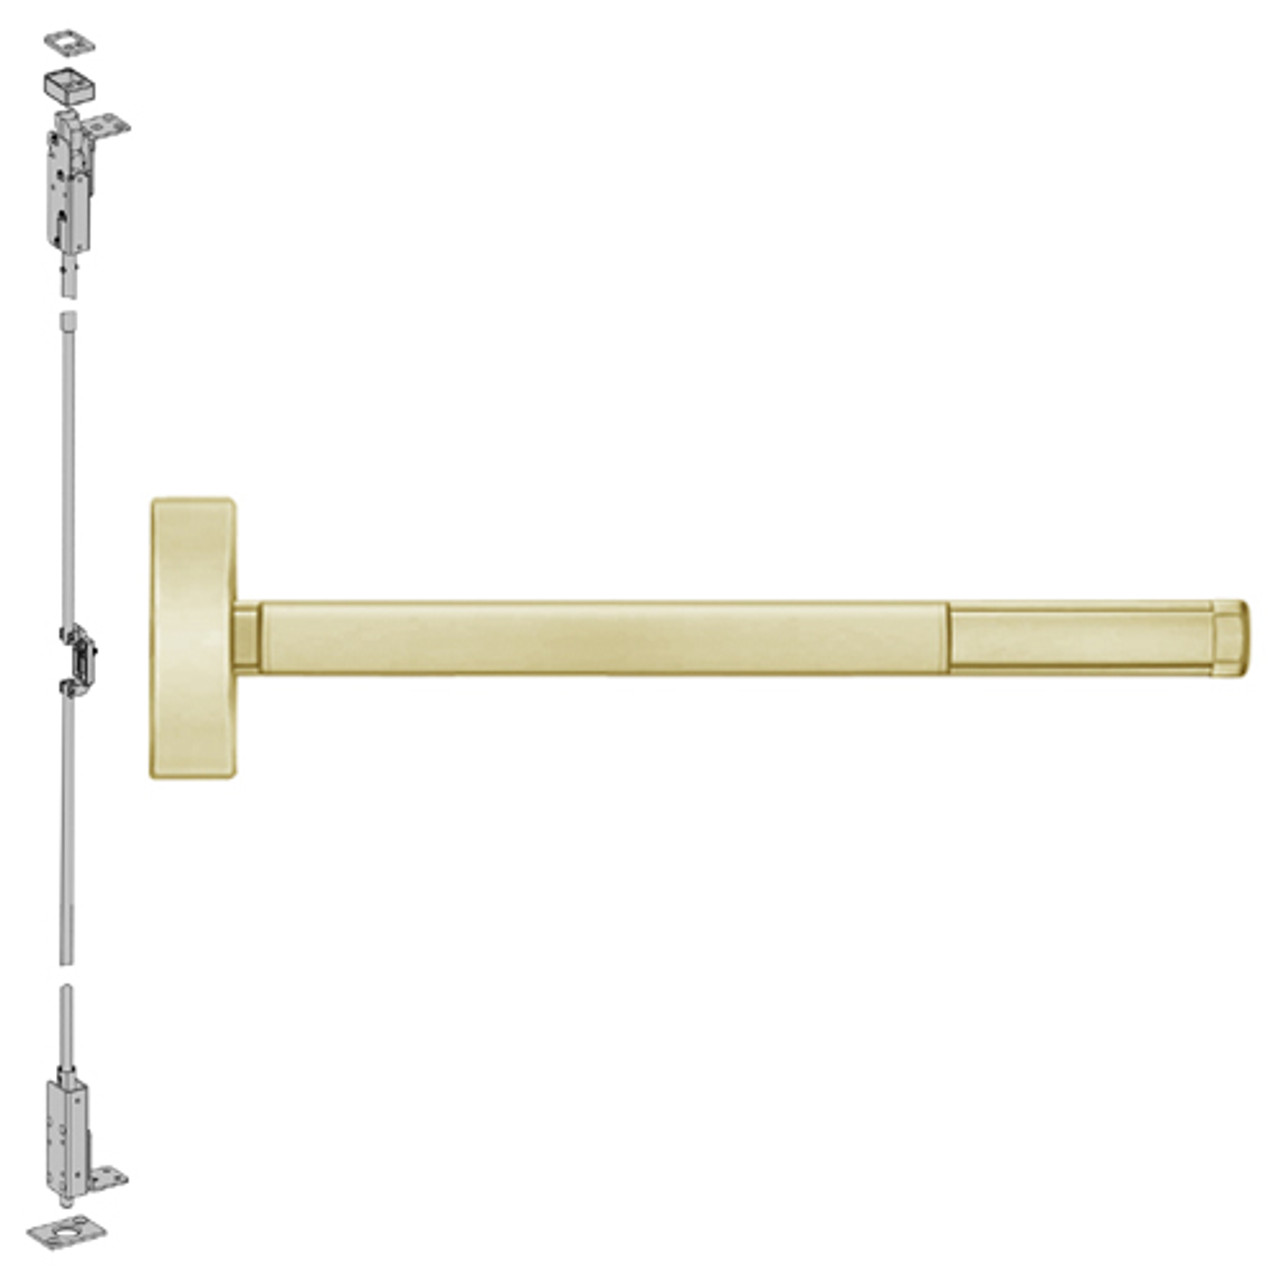 FL2705LBR-606-48 PHI 2700 Series Fire Rated Wood Door Concealed Vertical Exit Device Prepped for Key Controls Thumb Piece in Satin Brass Finish